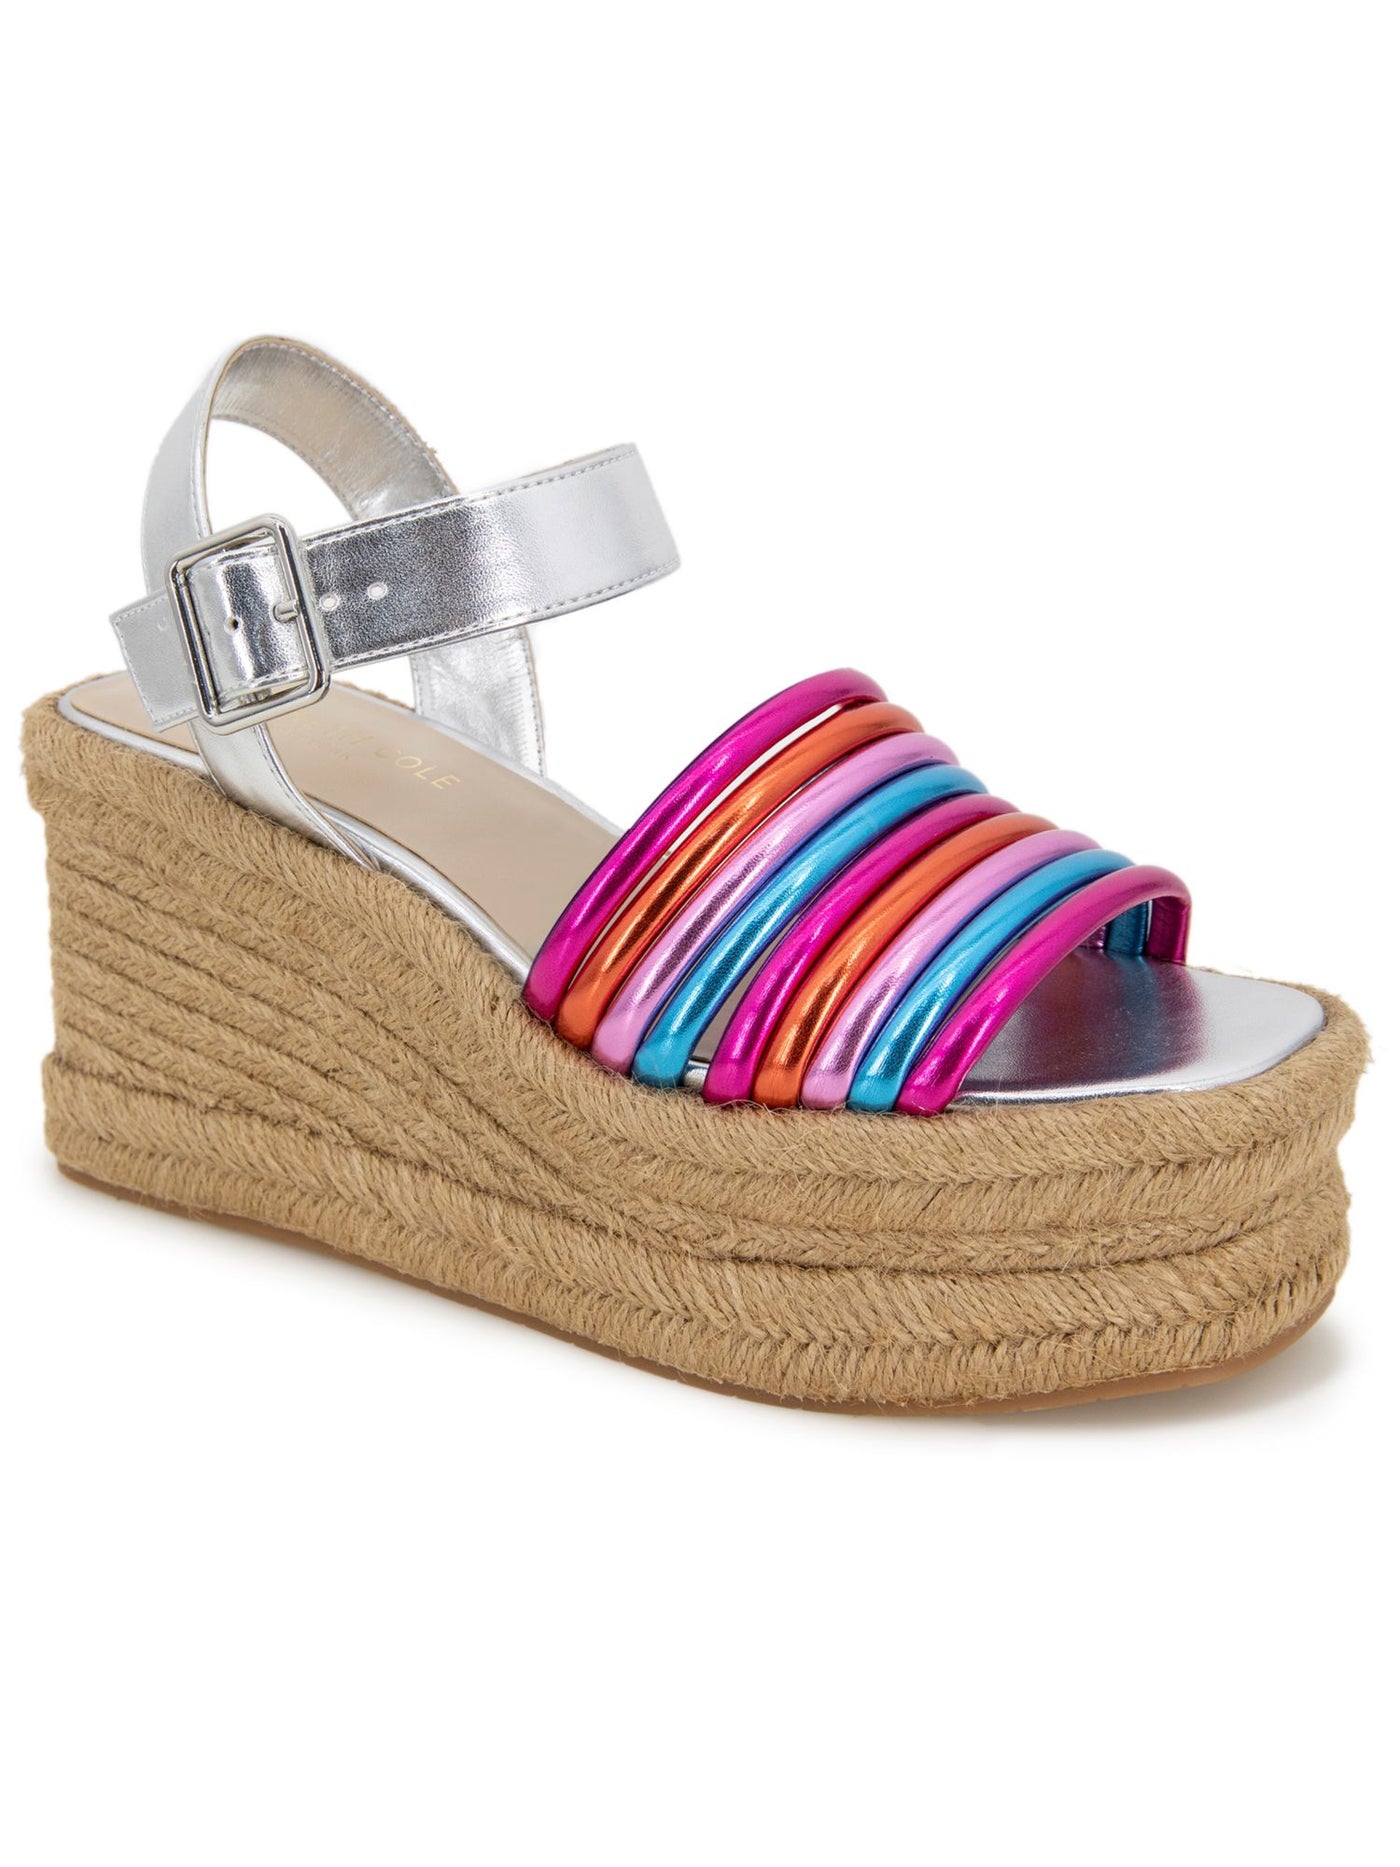 KENNETH COLE NEW YORK Womens Pink Colorblocked Stripe Espadrille Platform Cushioned Shelby Open Toe Wedge Buckle Espadrille Shoes 10 M